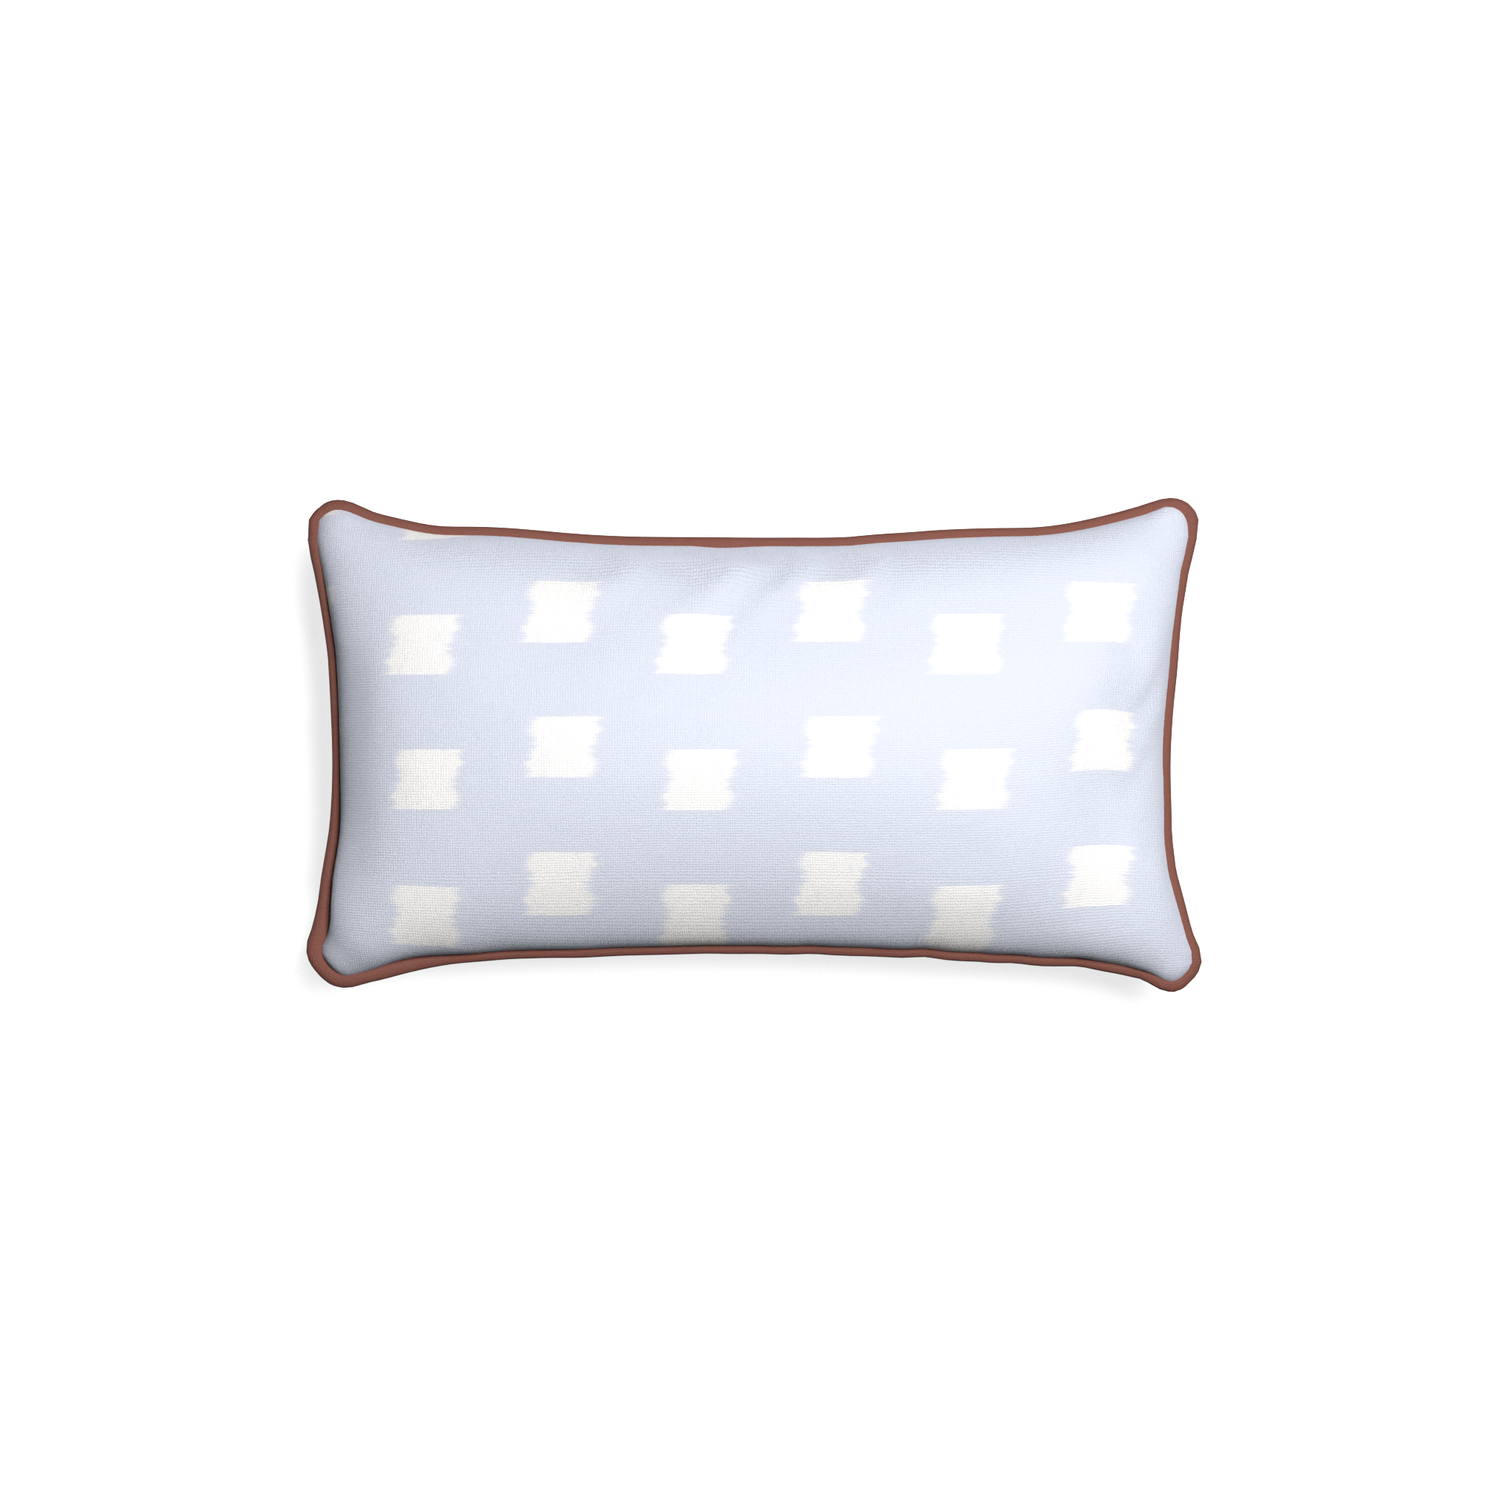 Petite-lumbar denton custom sky blue patternpillow with w piping on white background